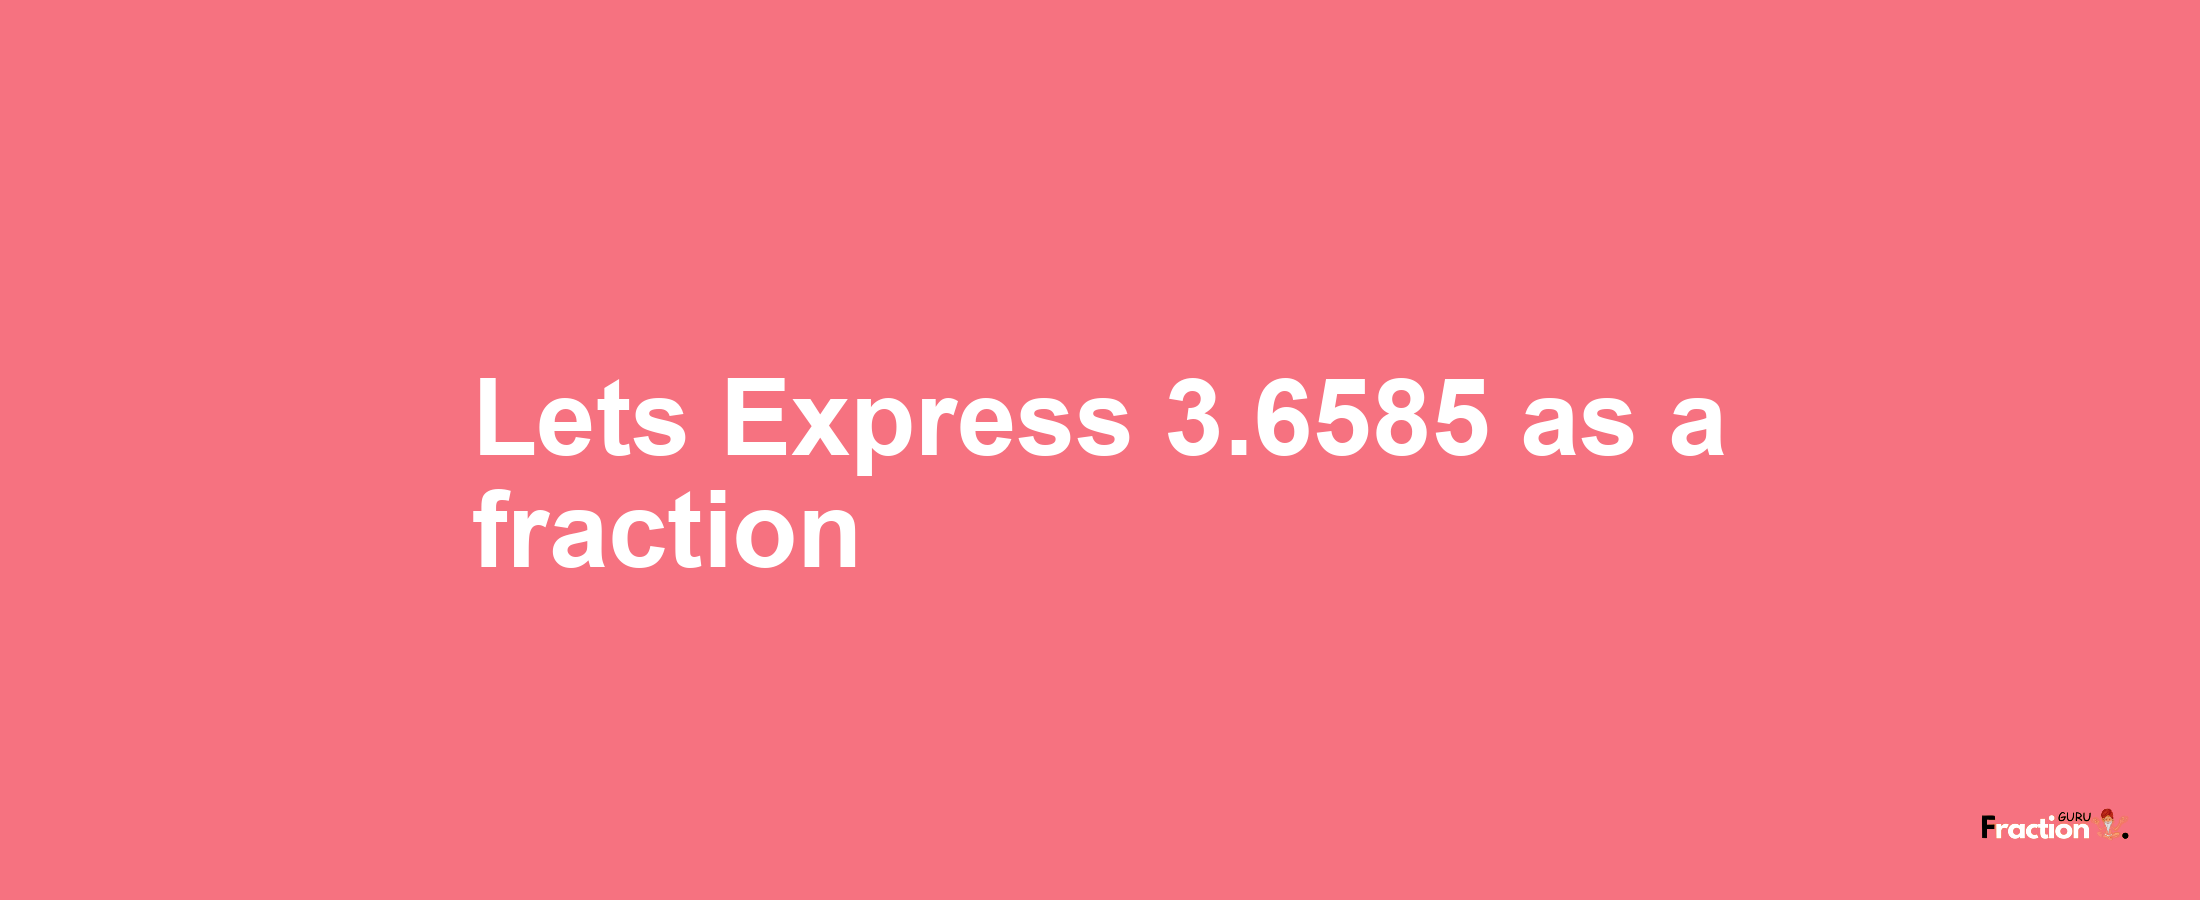 Lets Express 3.6585 as afraction